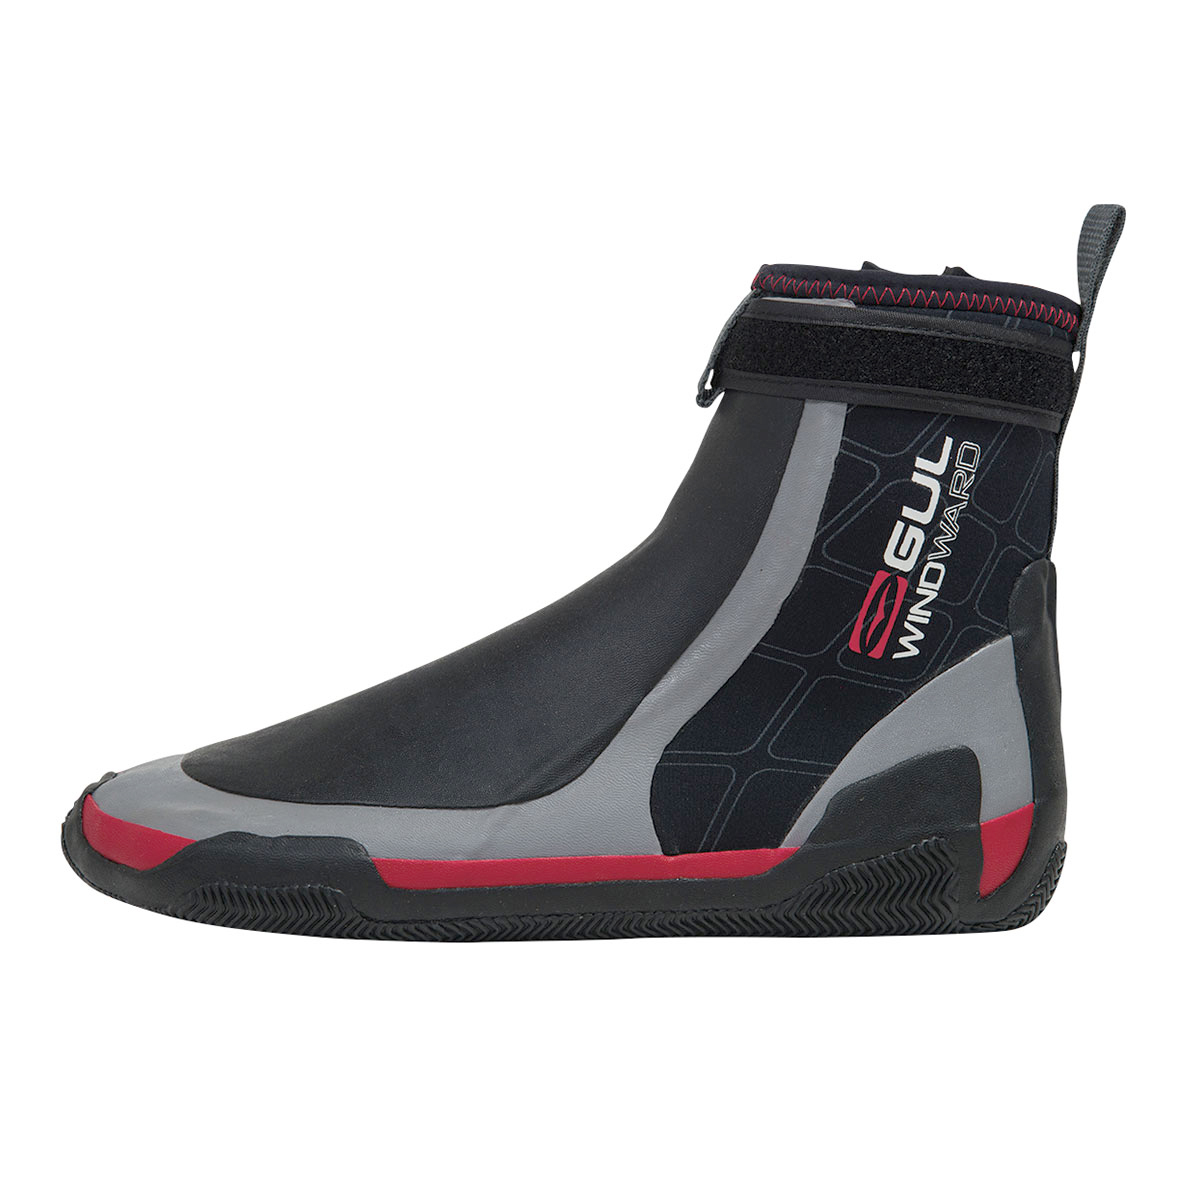 wetsuit boots 5mm